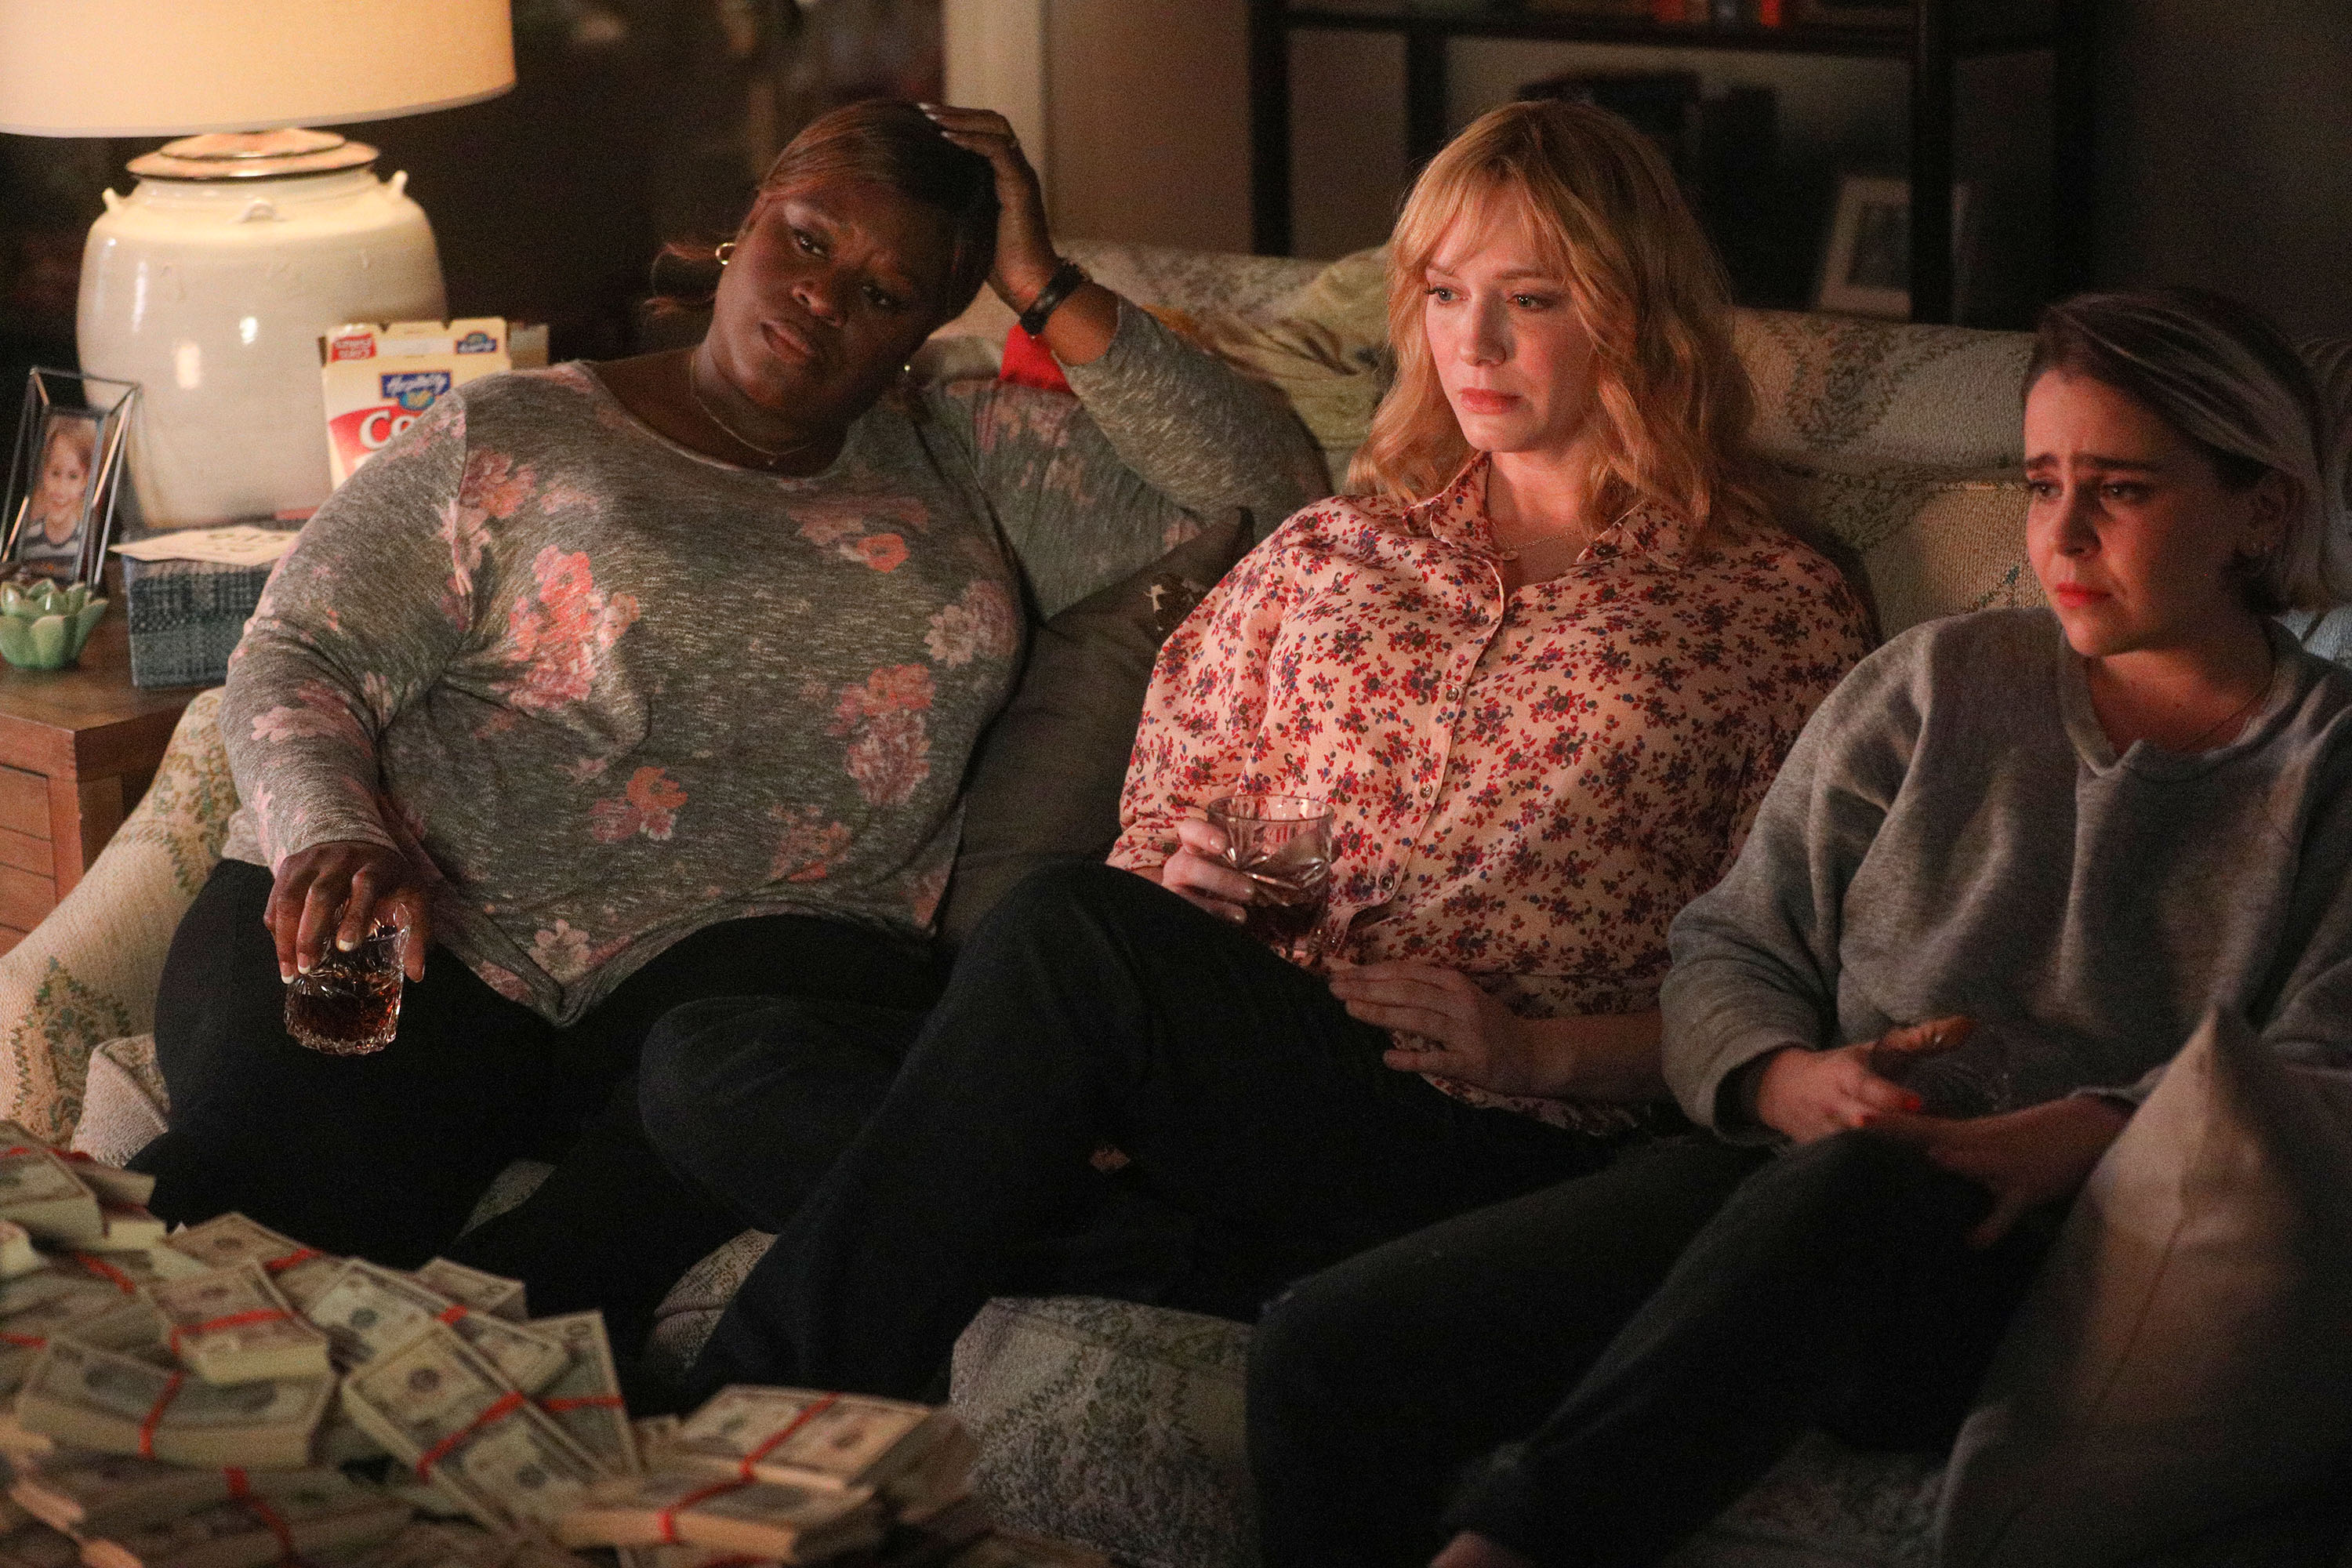 'Good Girls' stars Retta as Ruby Hill, Christina Hendricks as Beth Boland, and Mae Whitman as Annie Marks sitting on a couch frowning.